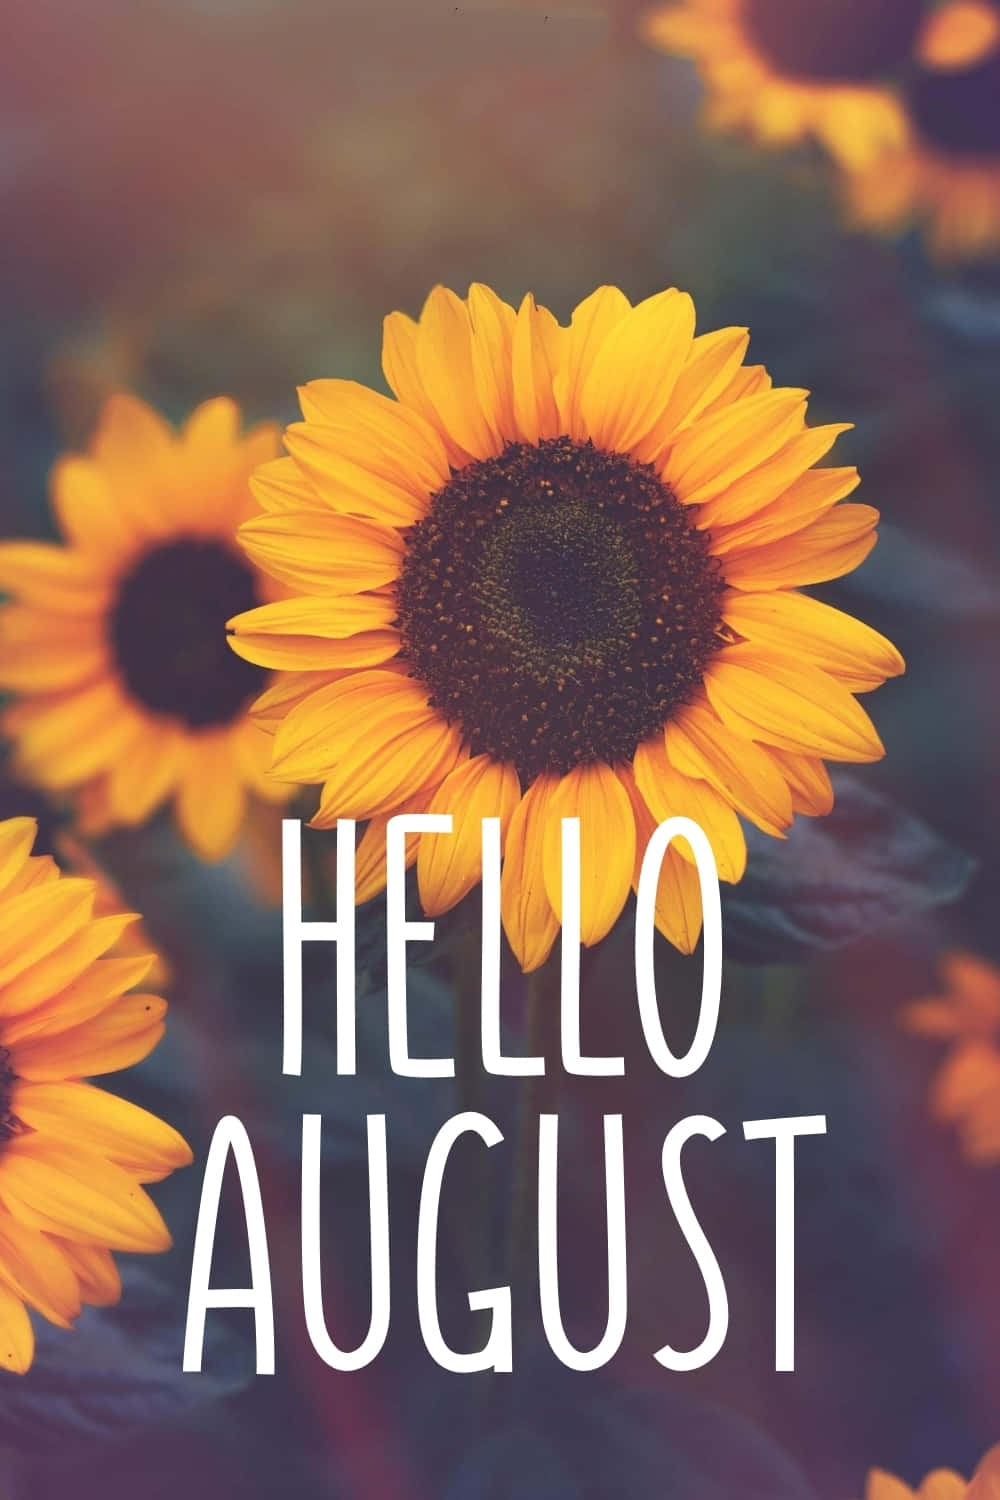 Celebrate the warmth of August